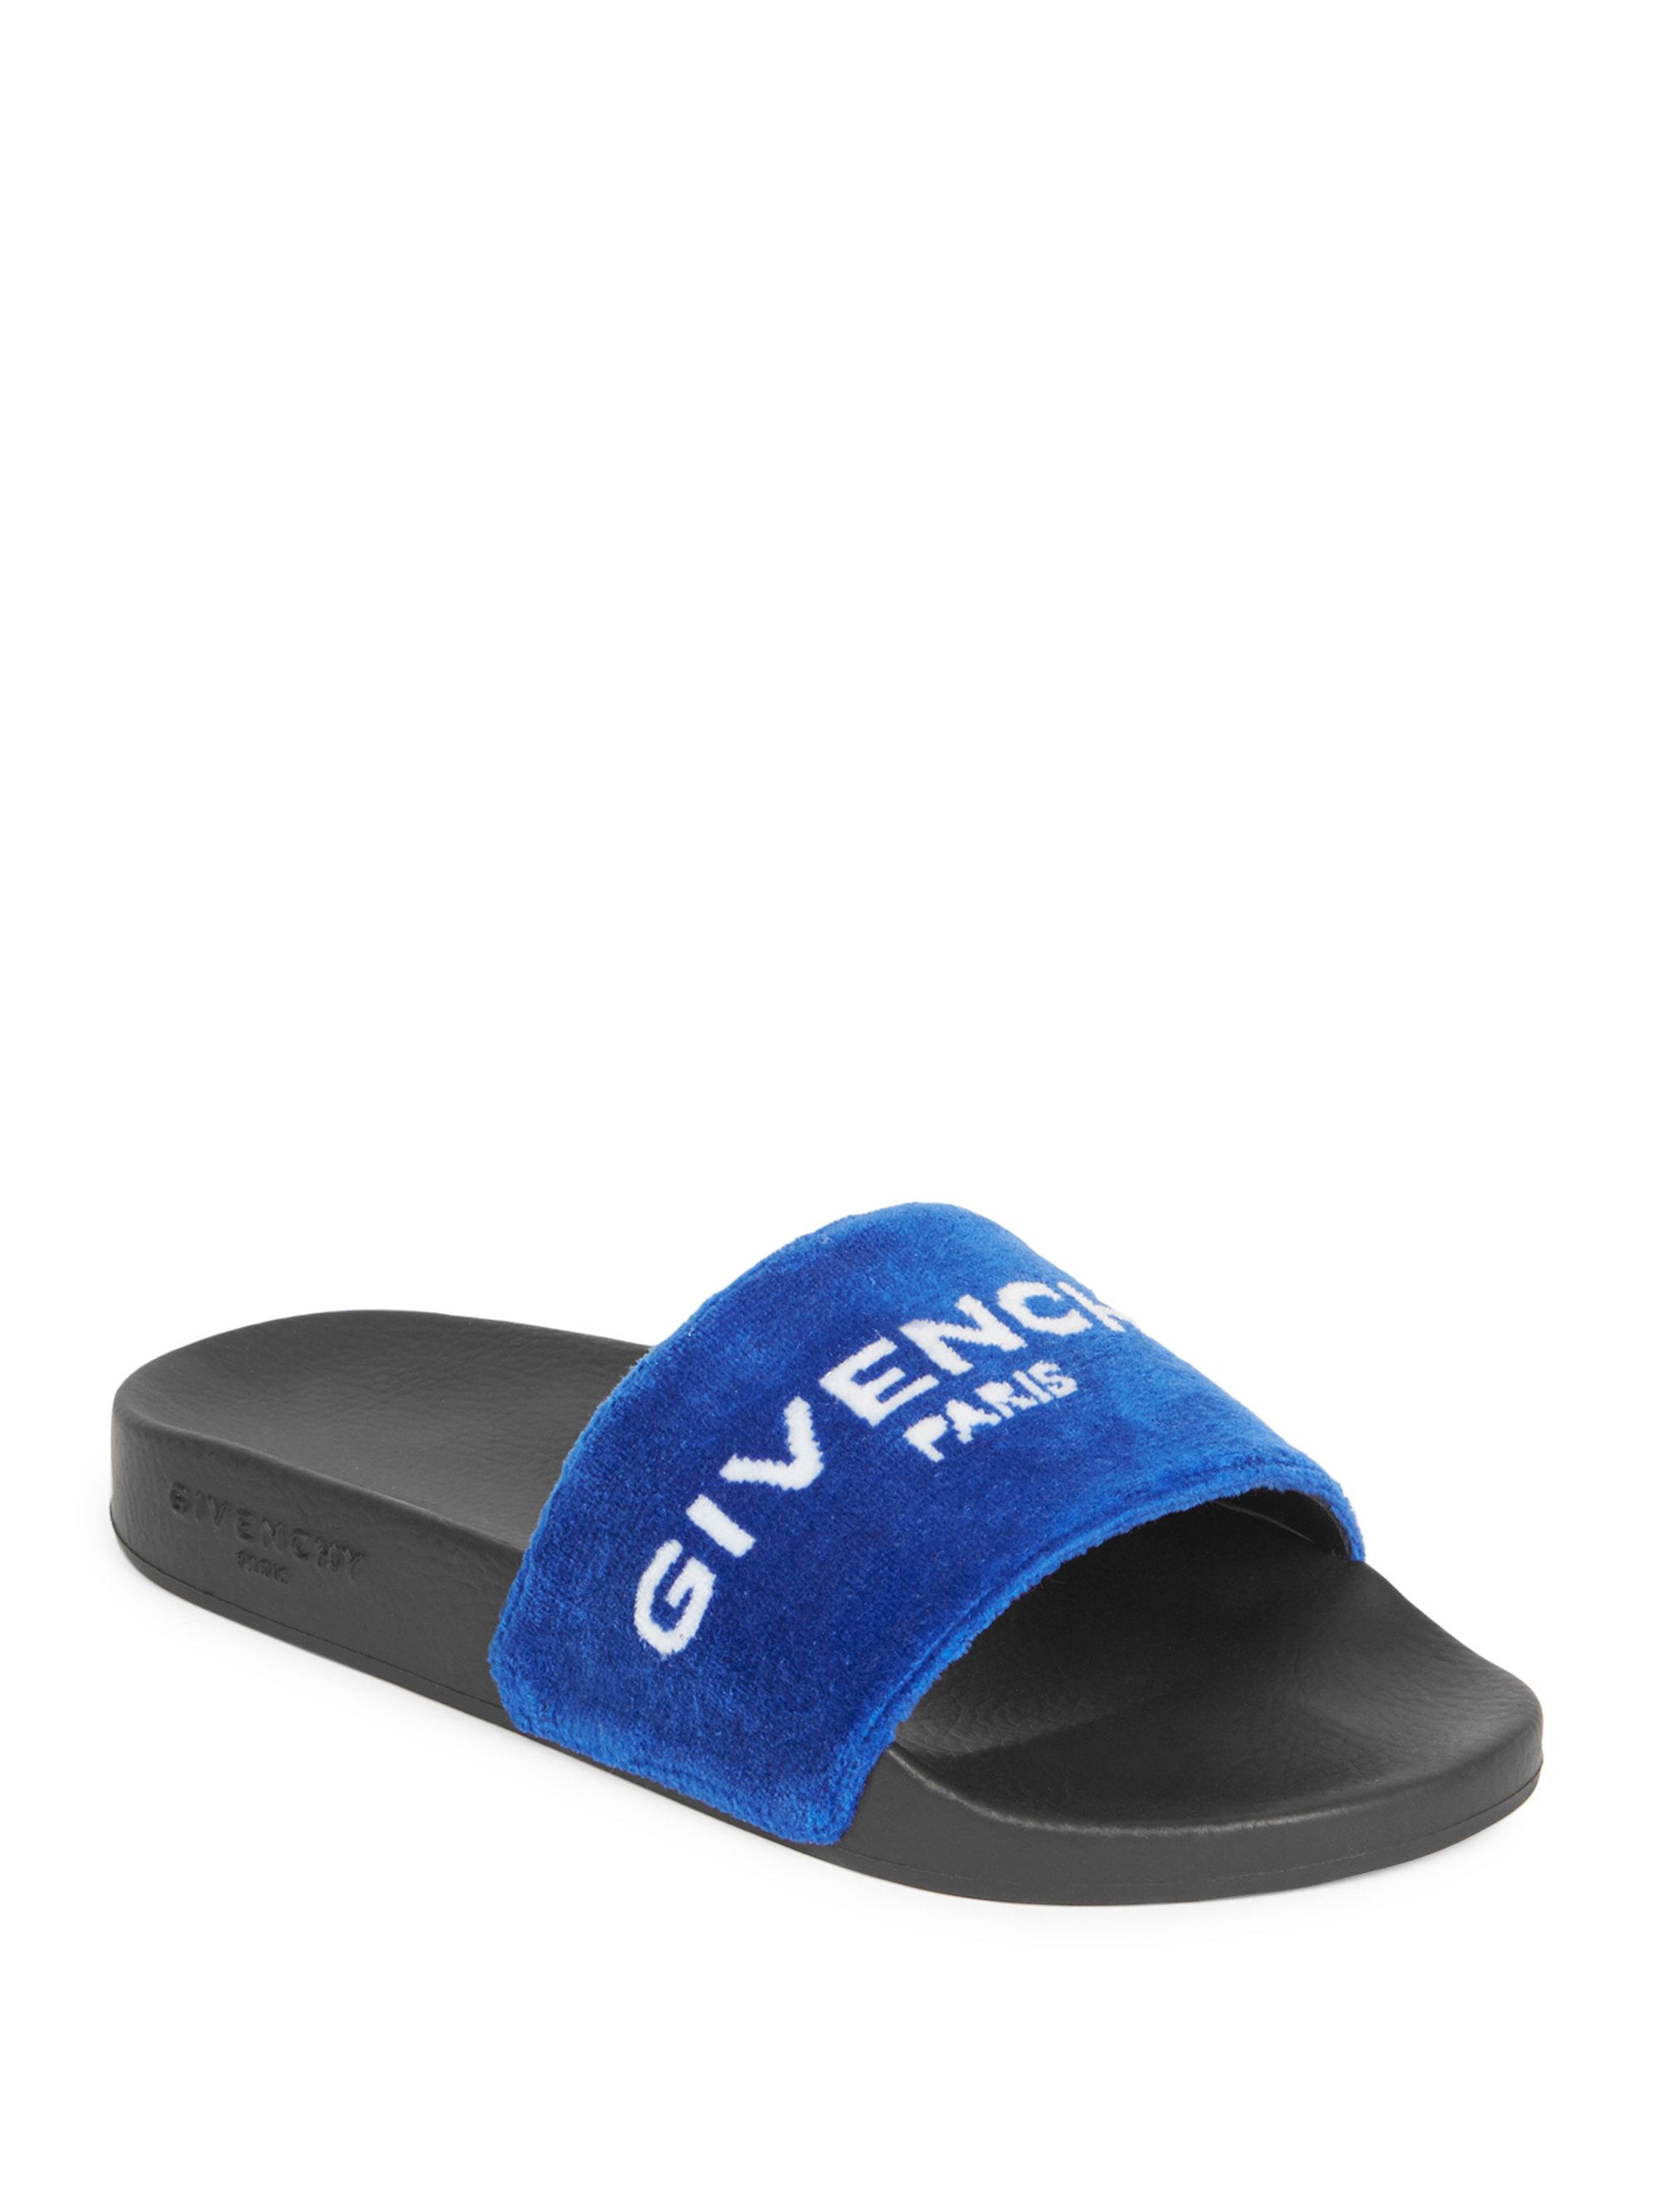 Givenchy Signature Rubber Slides in 